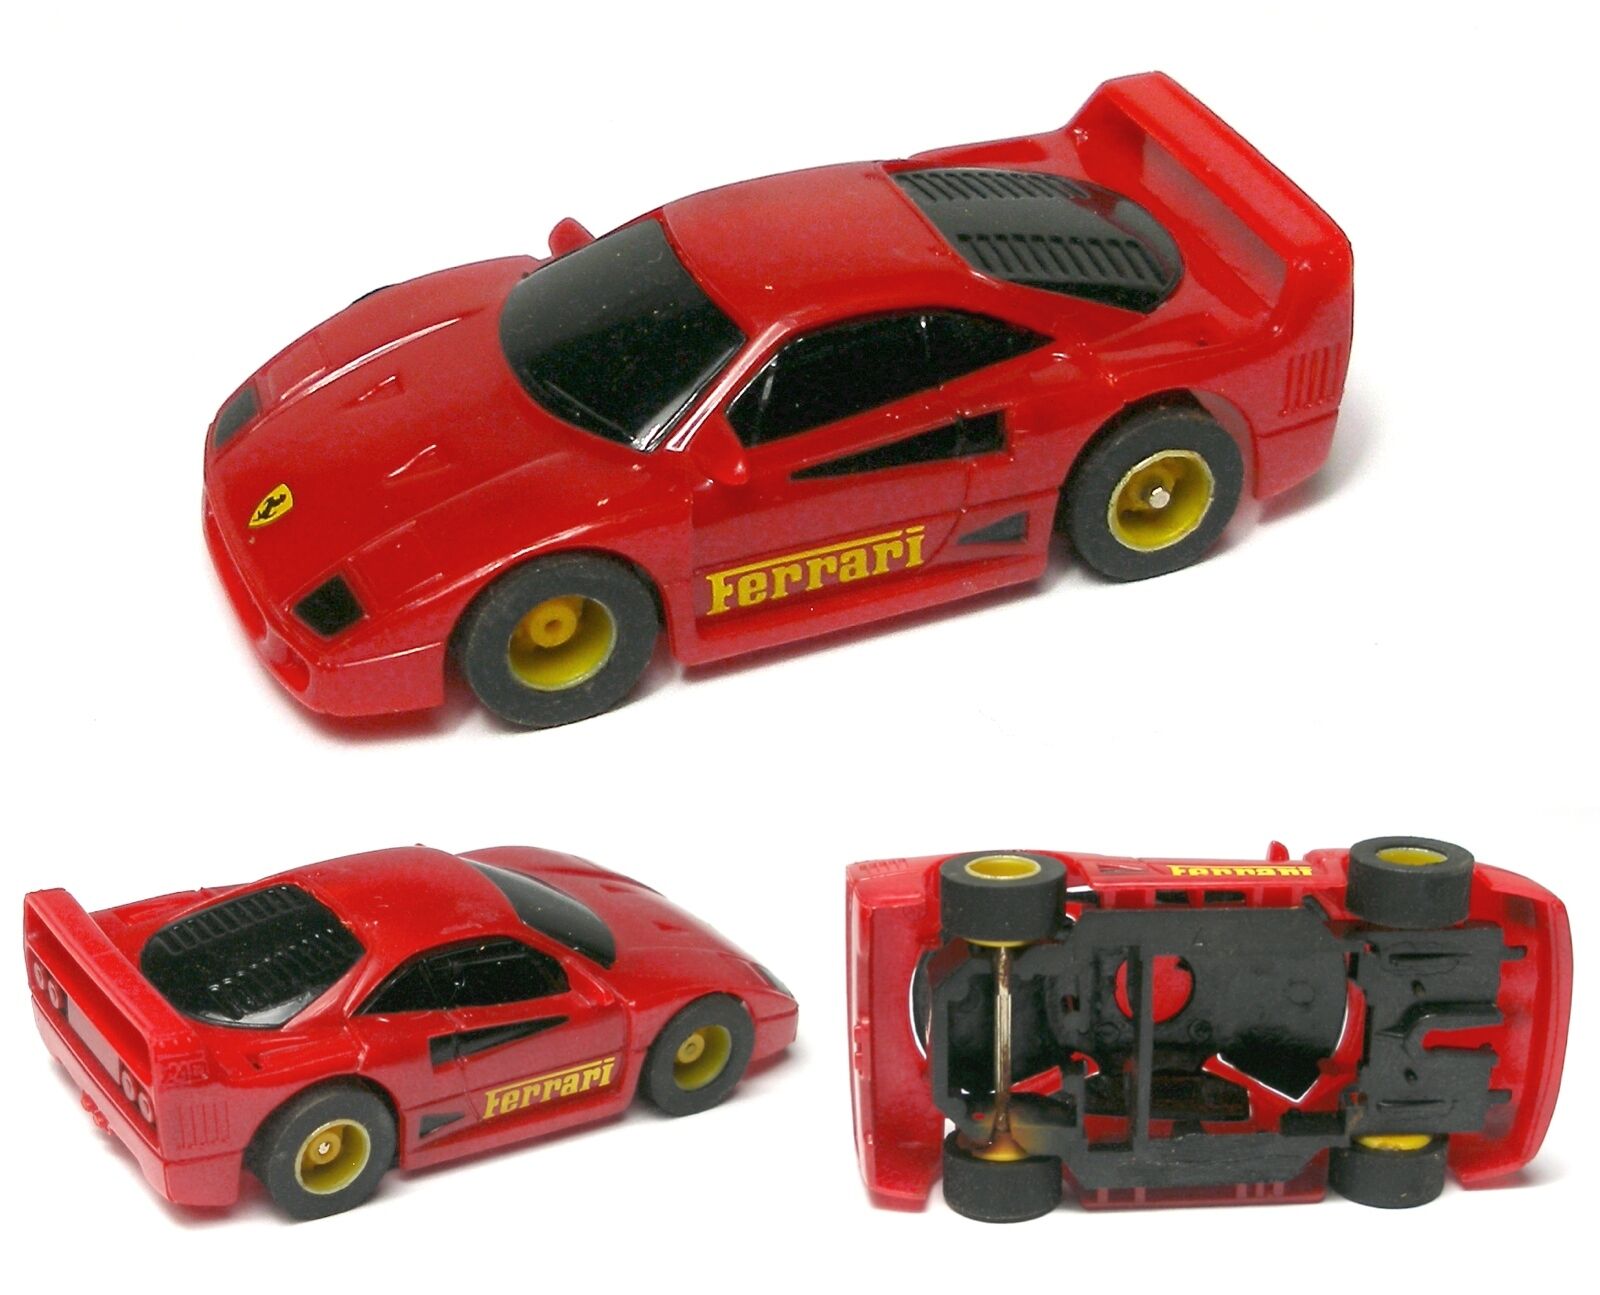 1991 TYCO Ferrari F-40 HO Slot Car Red BODY & VERY Detailed with